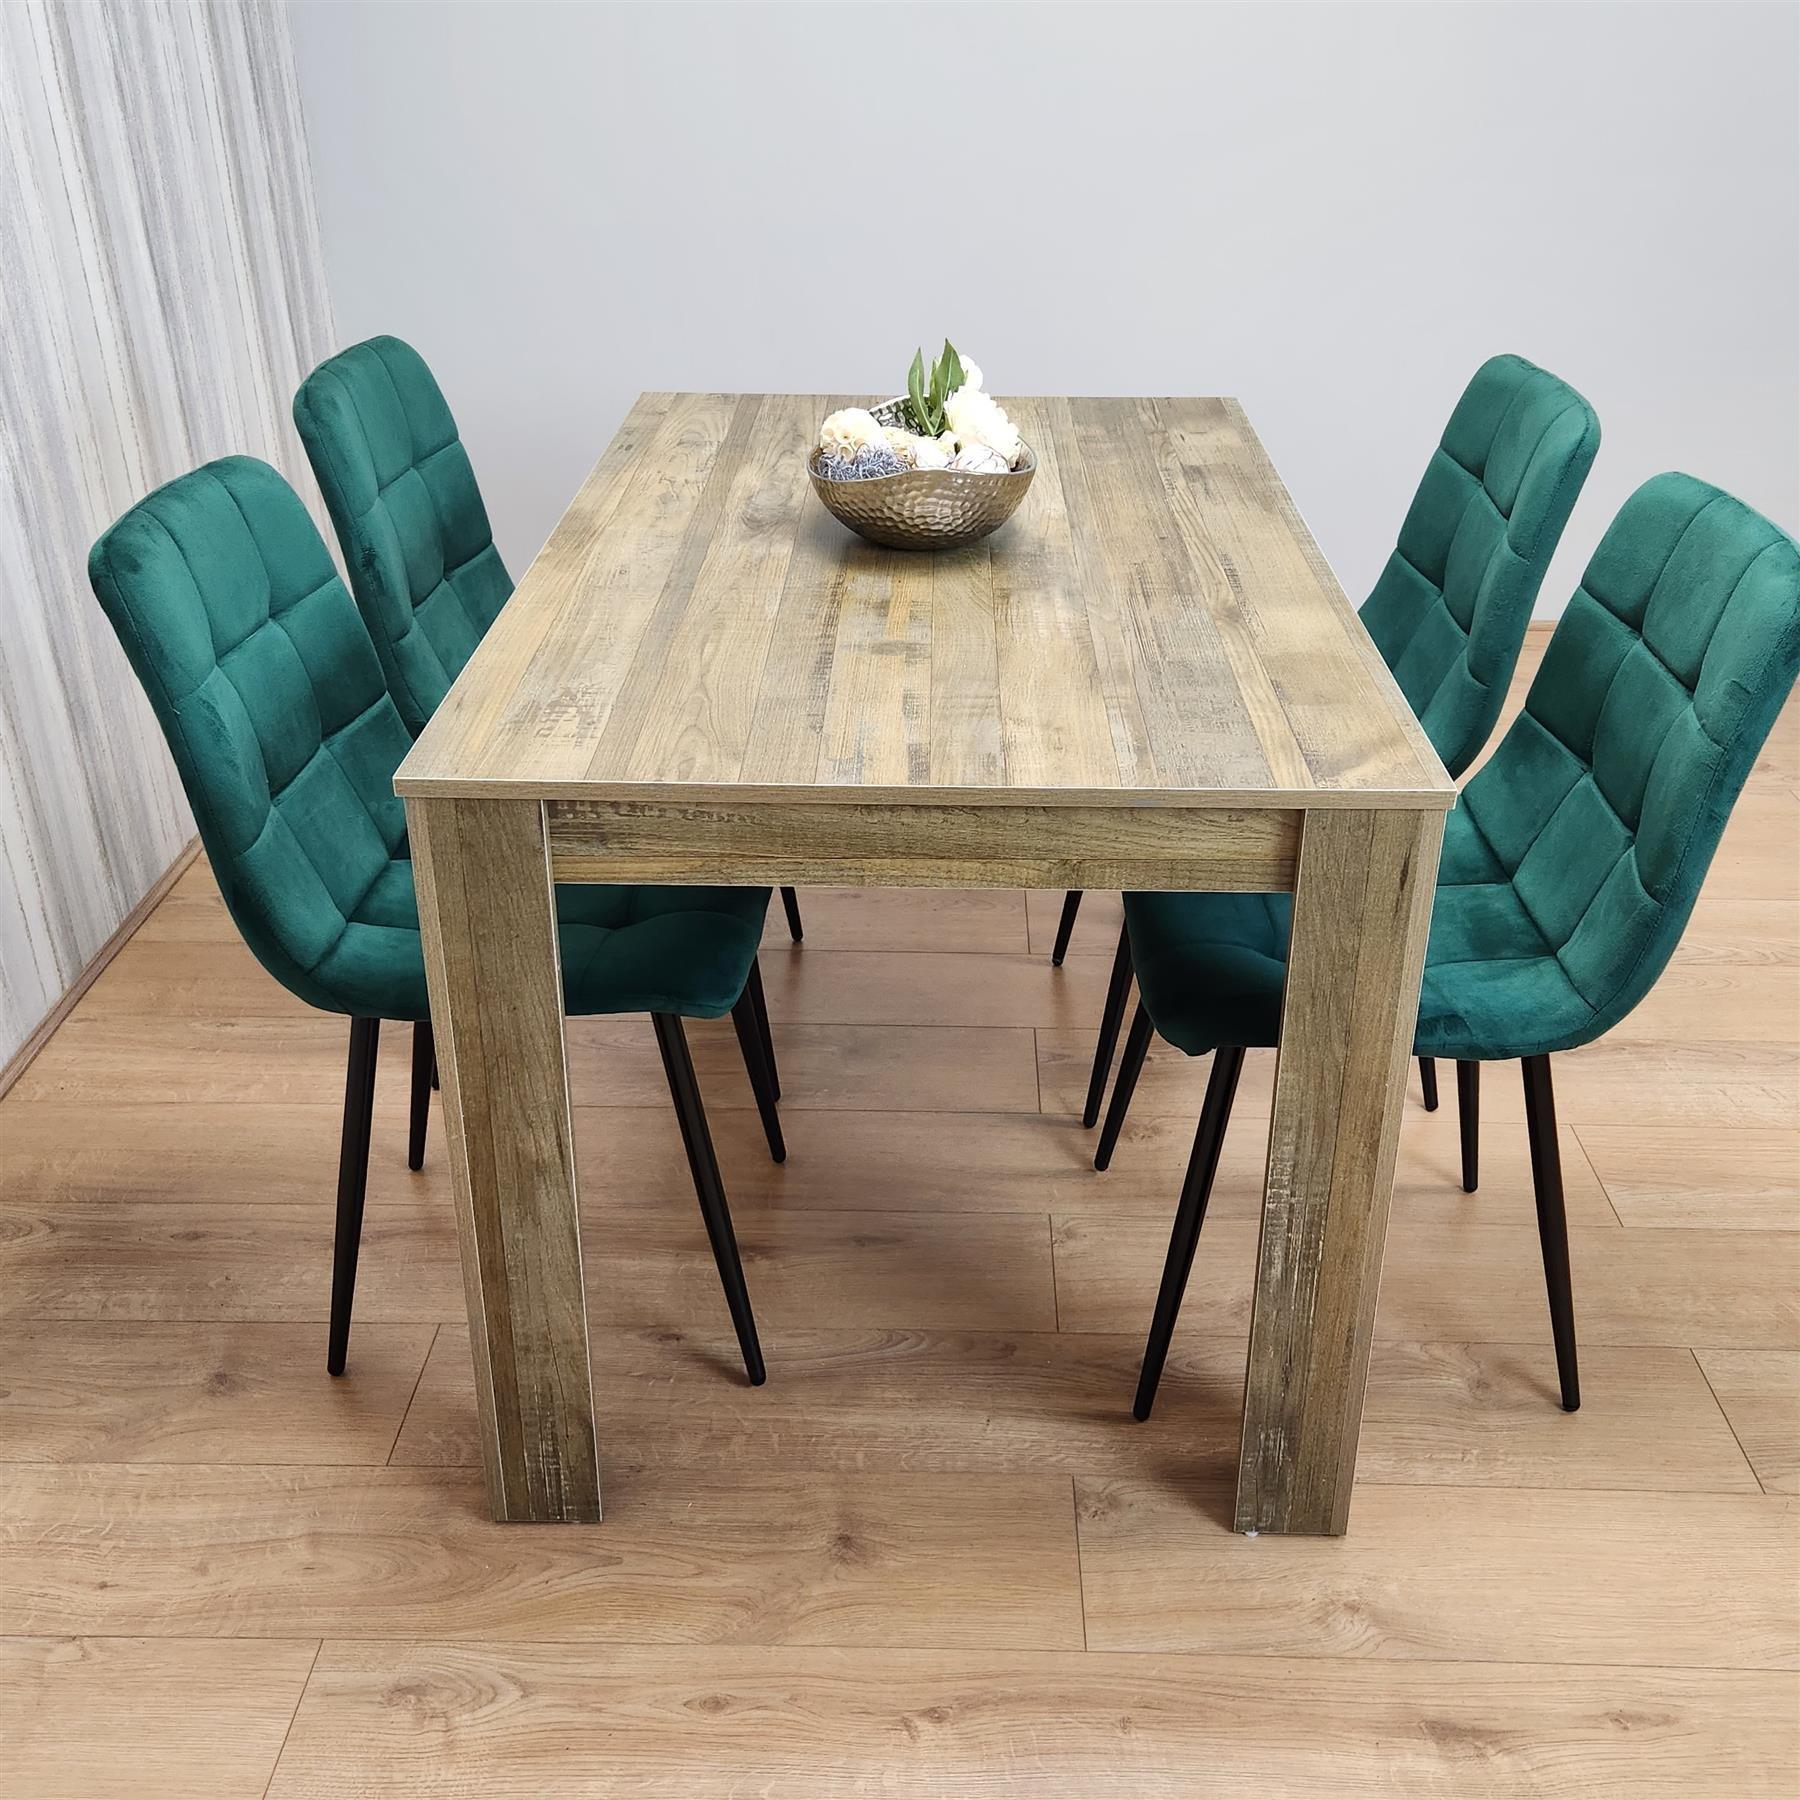 Dining Set of 4 Dining Table and 4 Green Velvet Chairs Dining Room Furniture